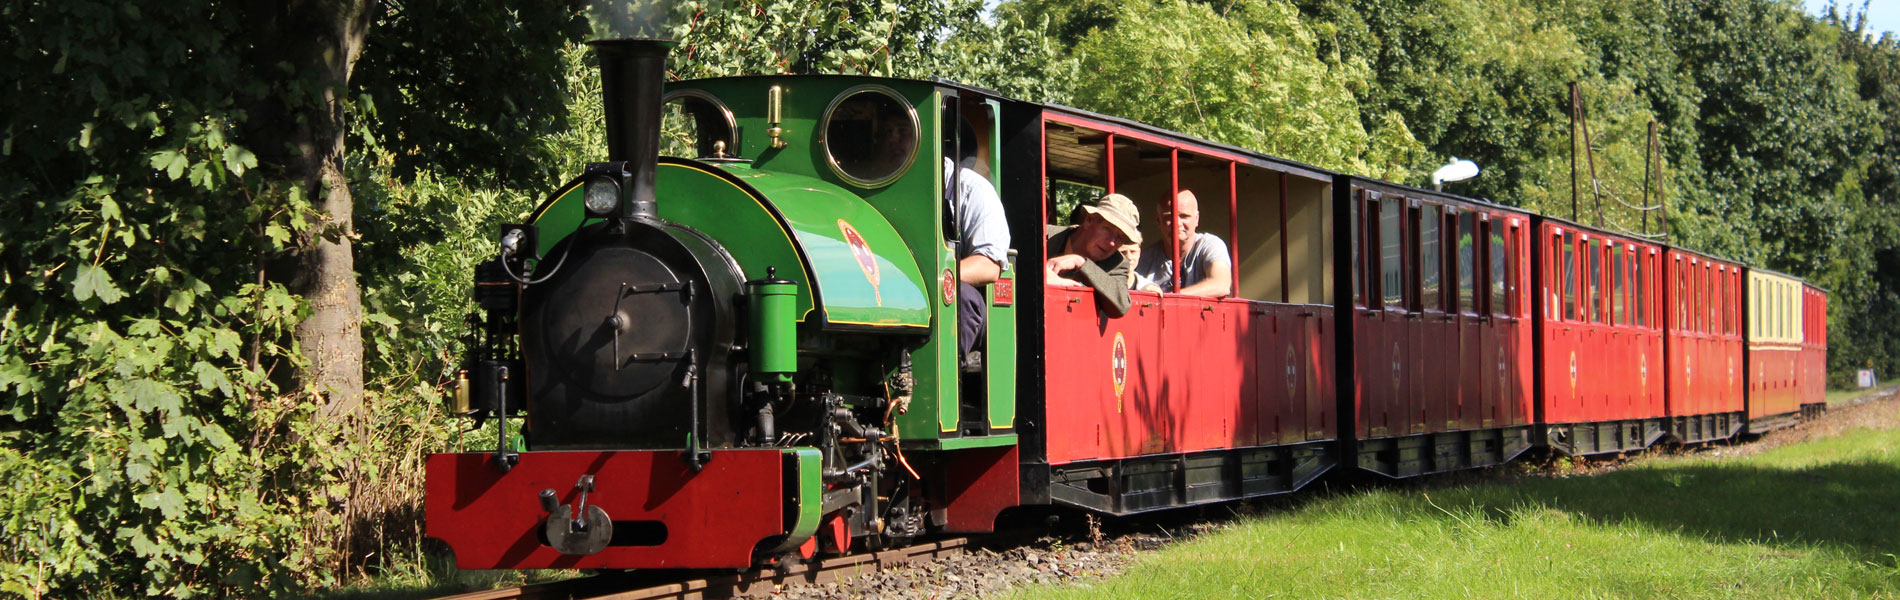 People riding on a steam train